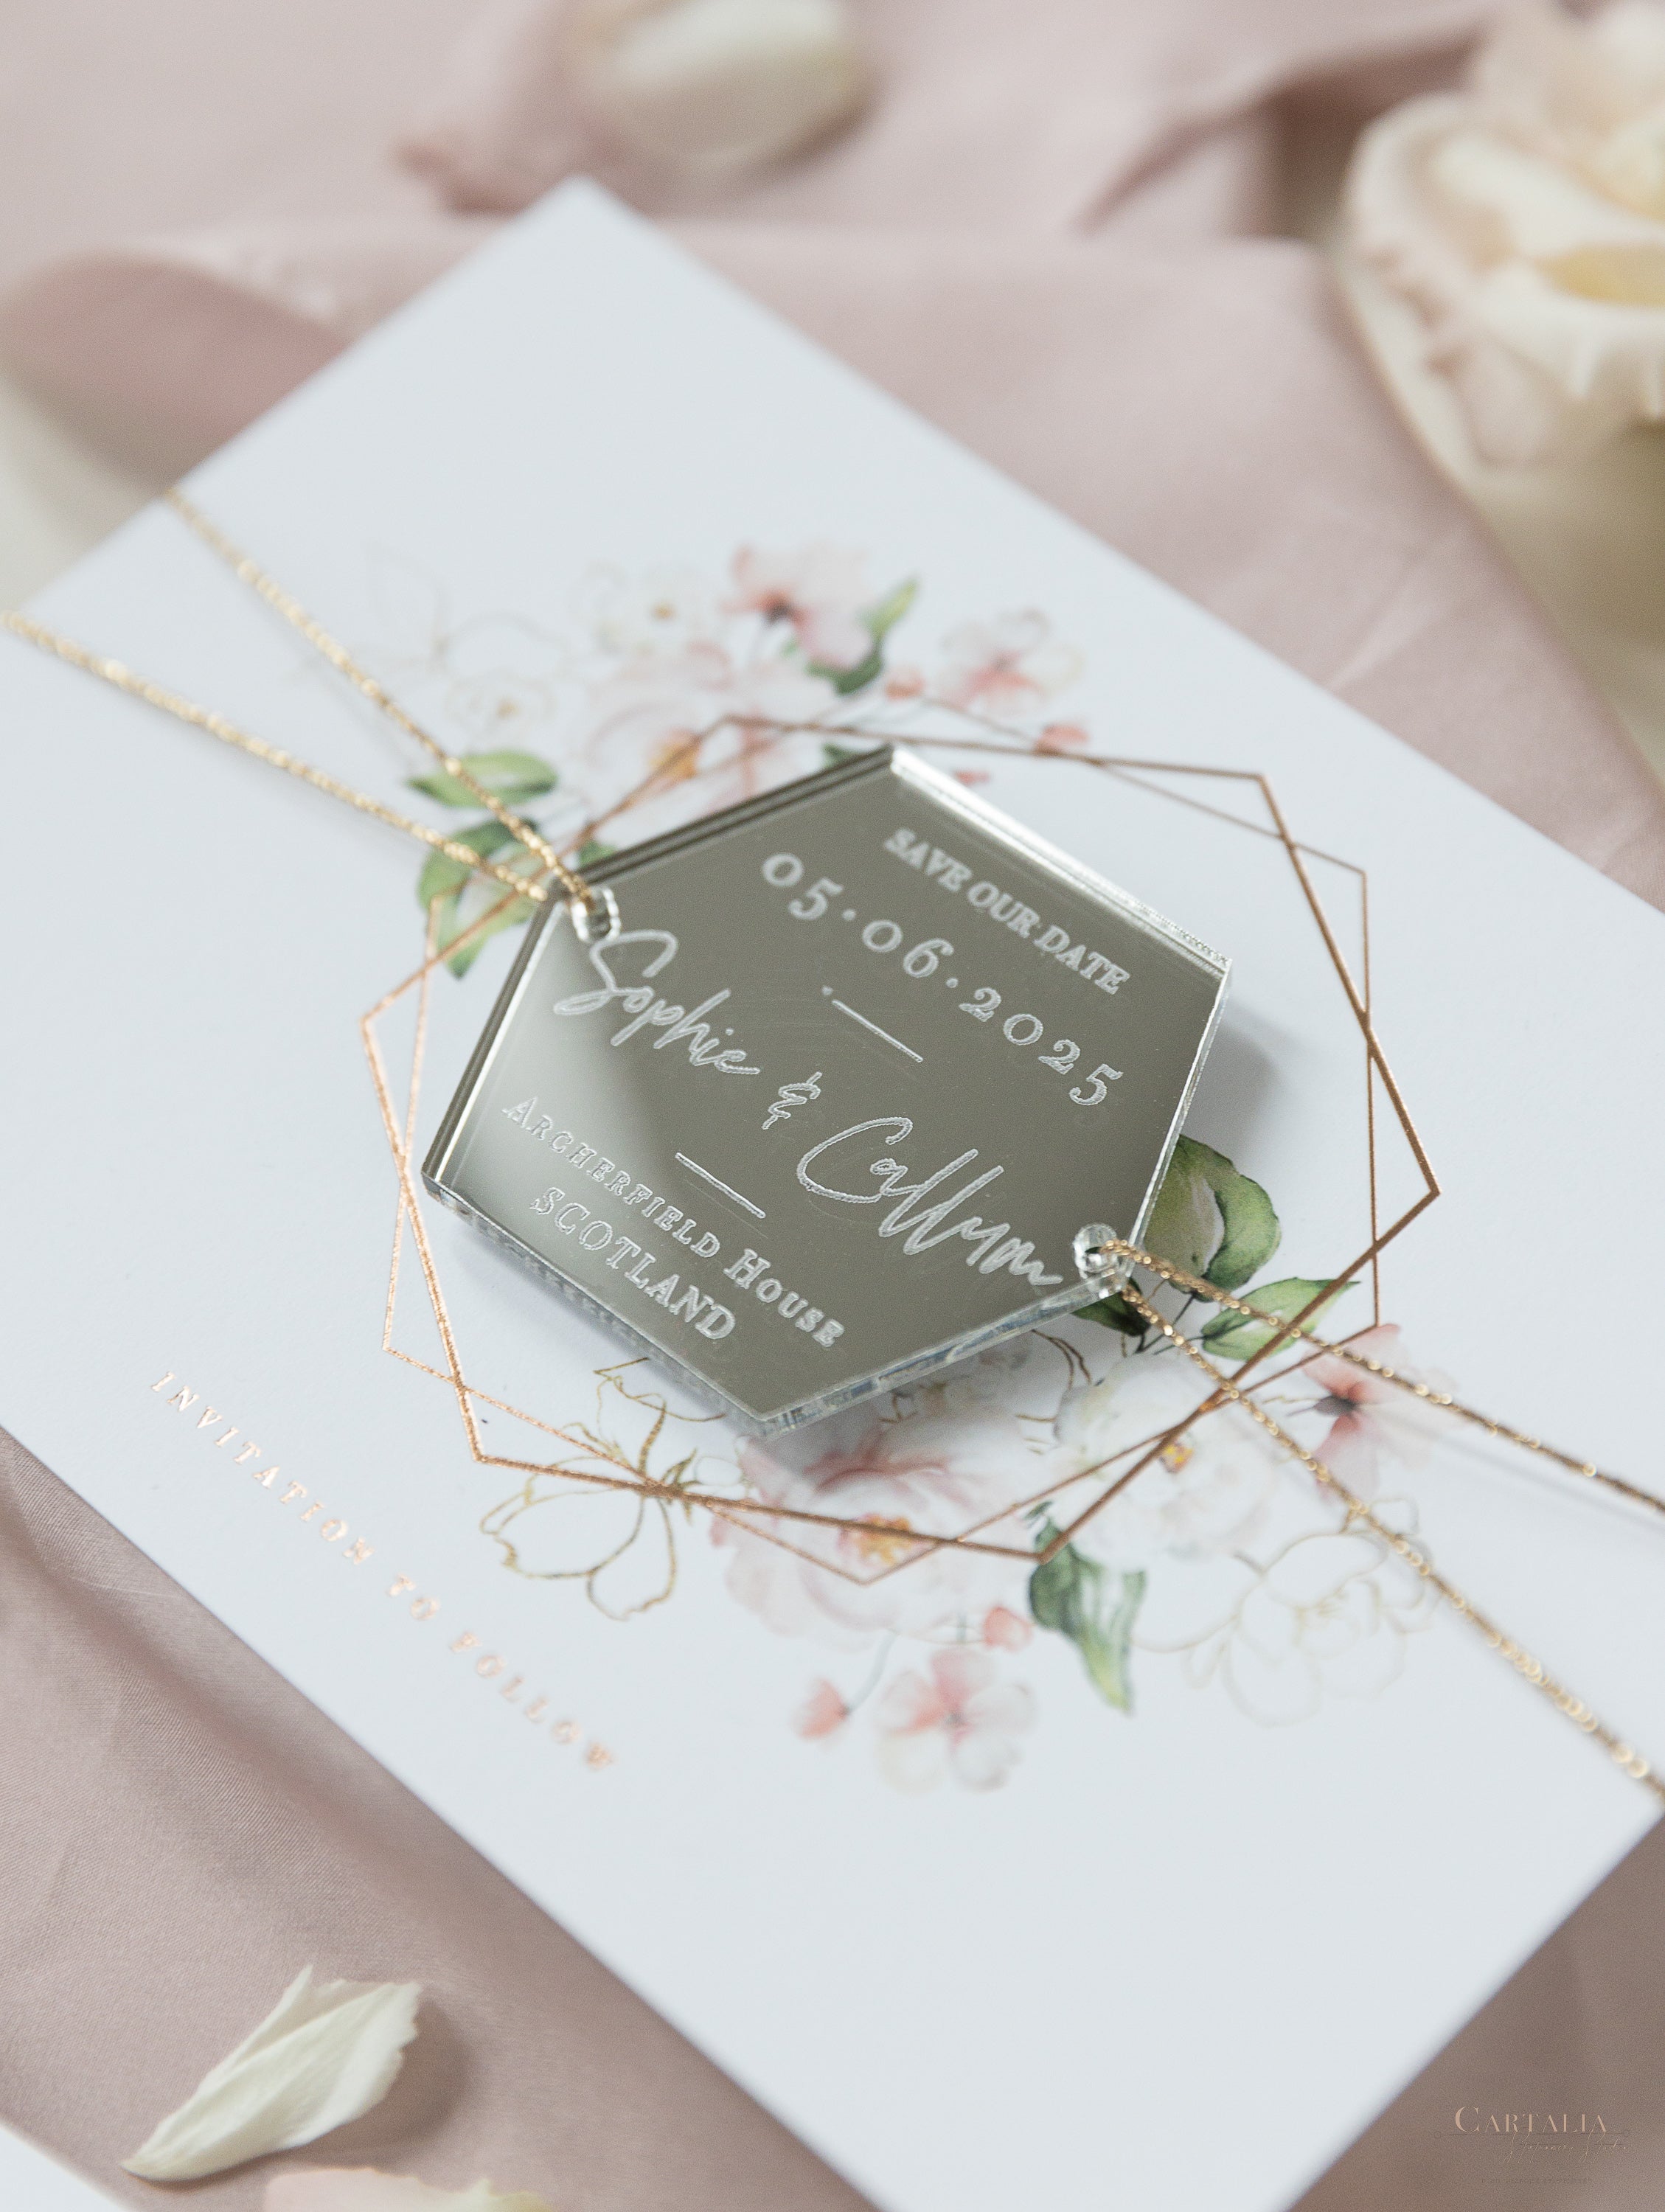 Wedding Save the Date Card with Rose Gold Plexi Mirror Luggage Magnet –  Cartalia